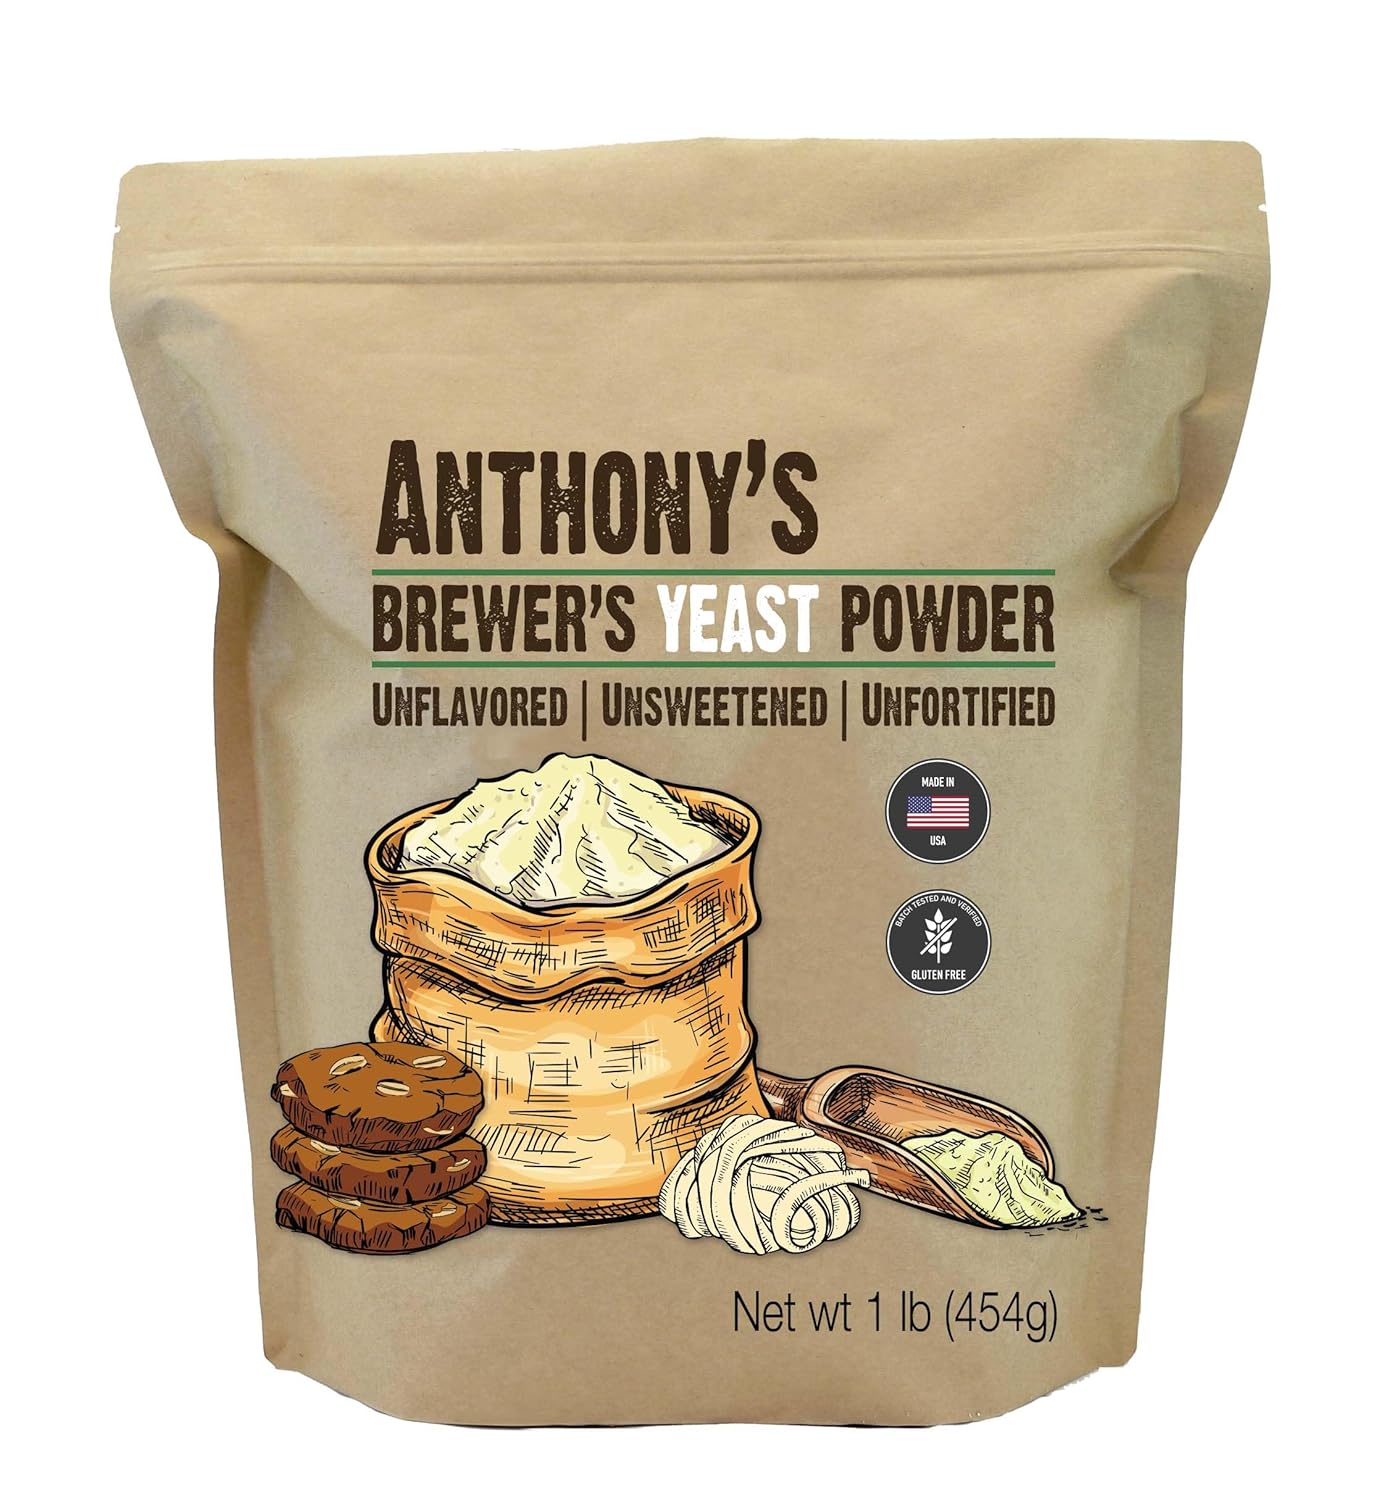 Anthony's Brewer's Yeast, 1 lb, Made in USA, Gluten Free, For Lactation Support, Unflavored, Unsweetened